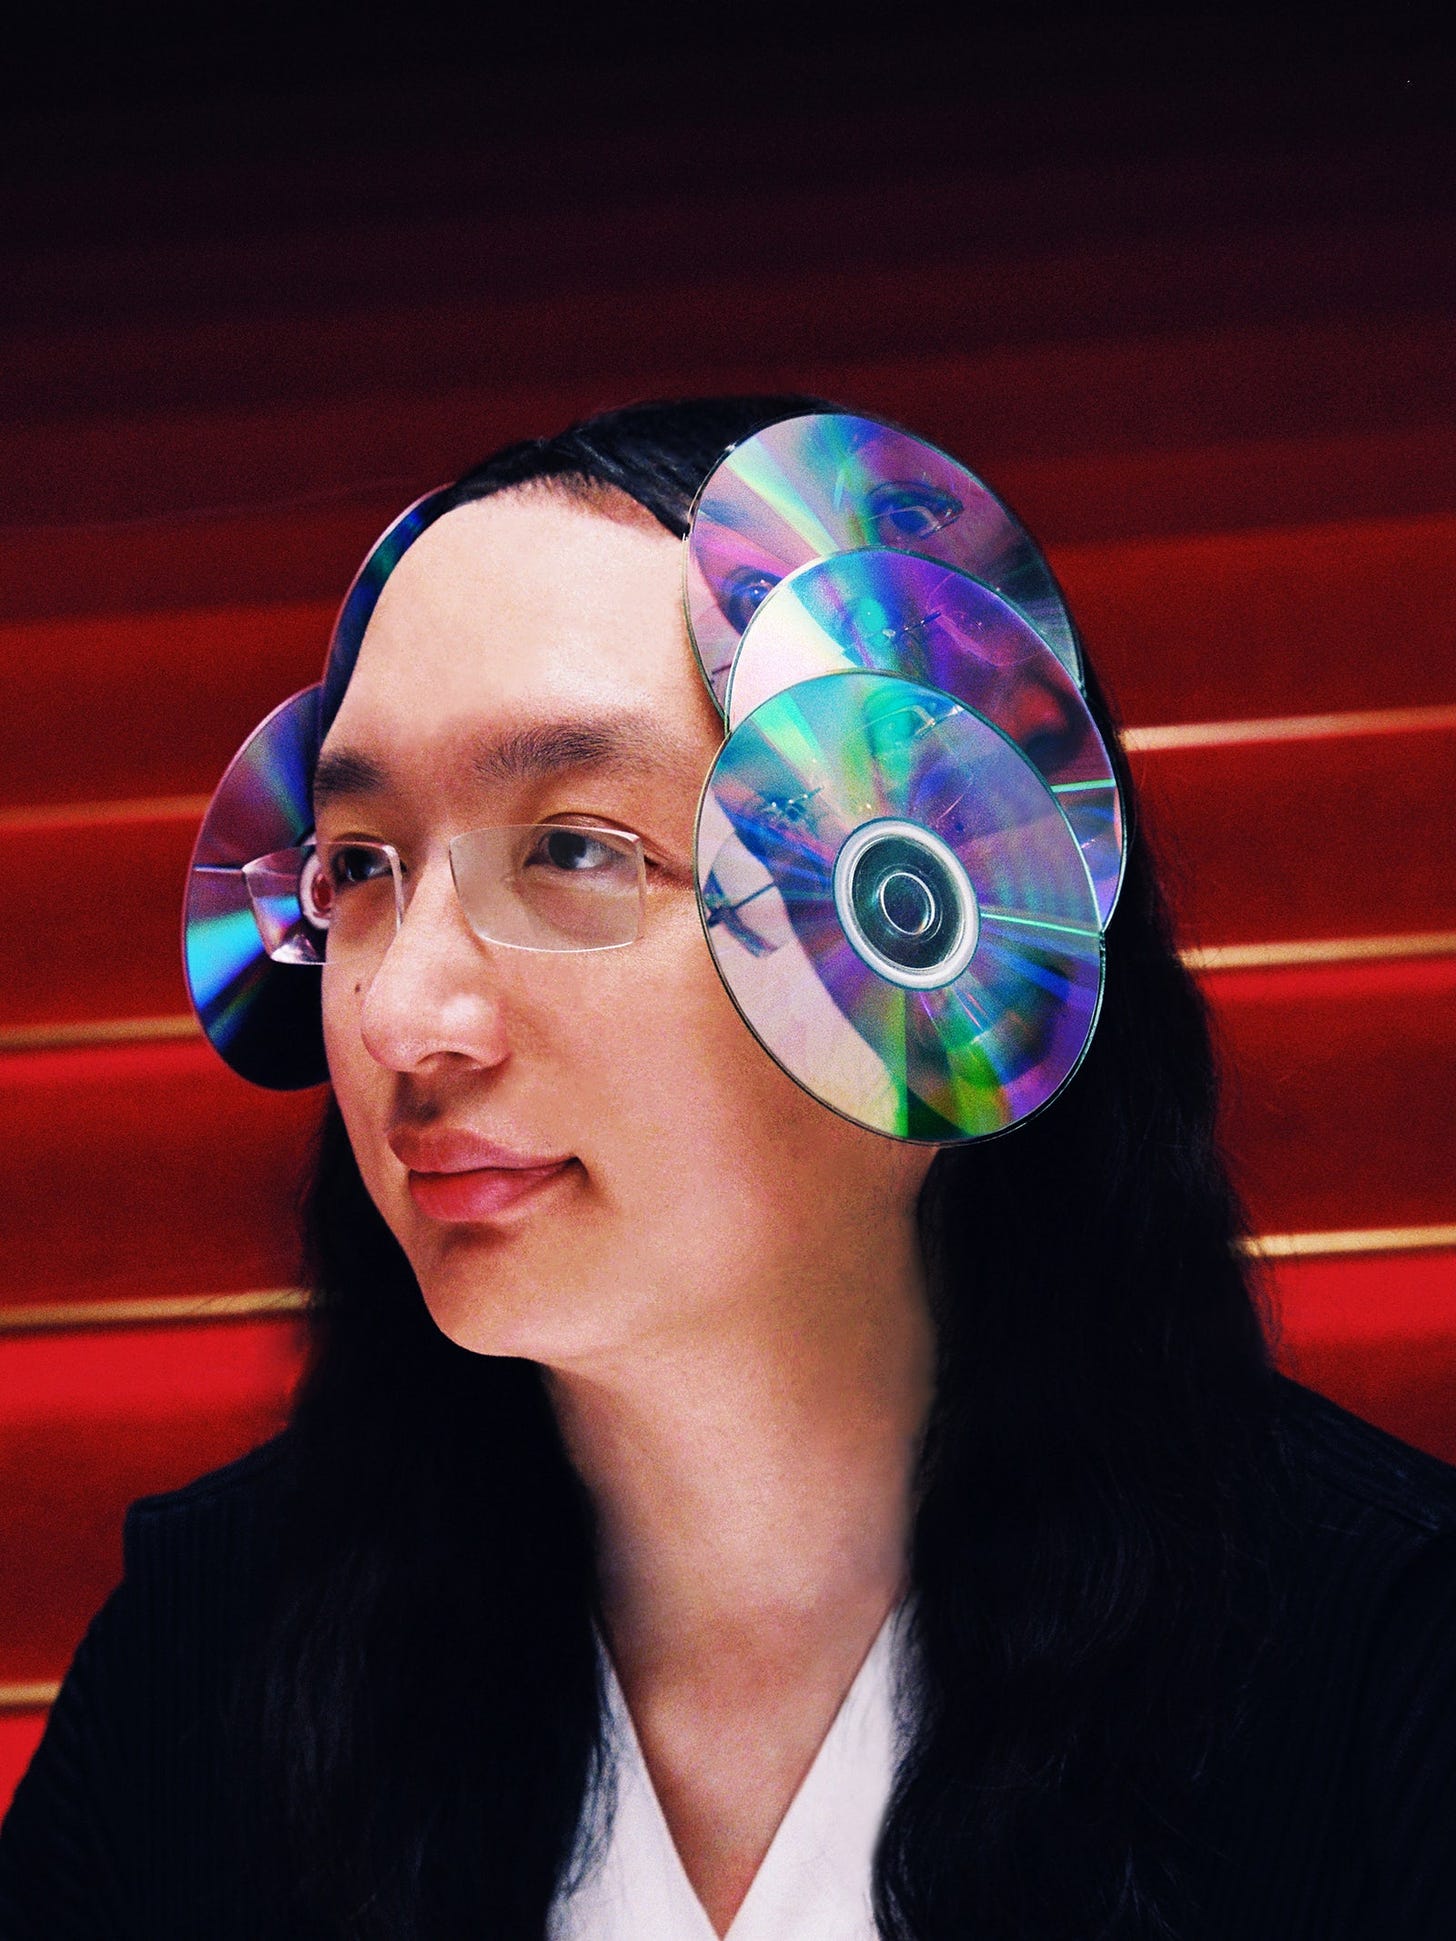 Audrey Tang with discs attached to her head with her reflection appearing in each disc